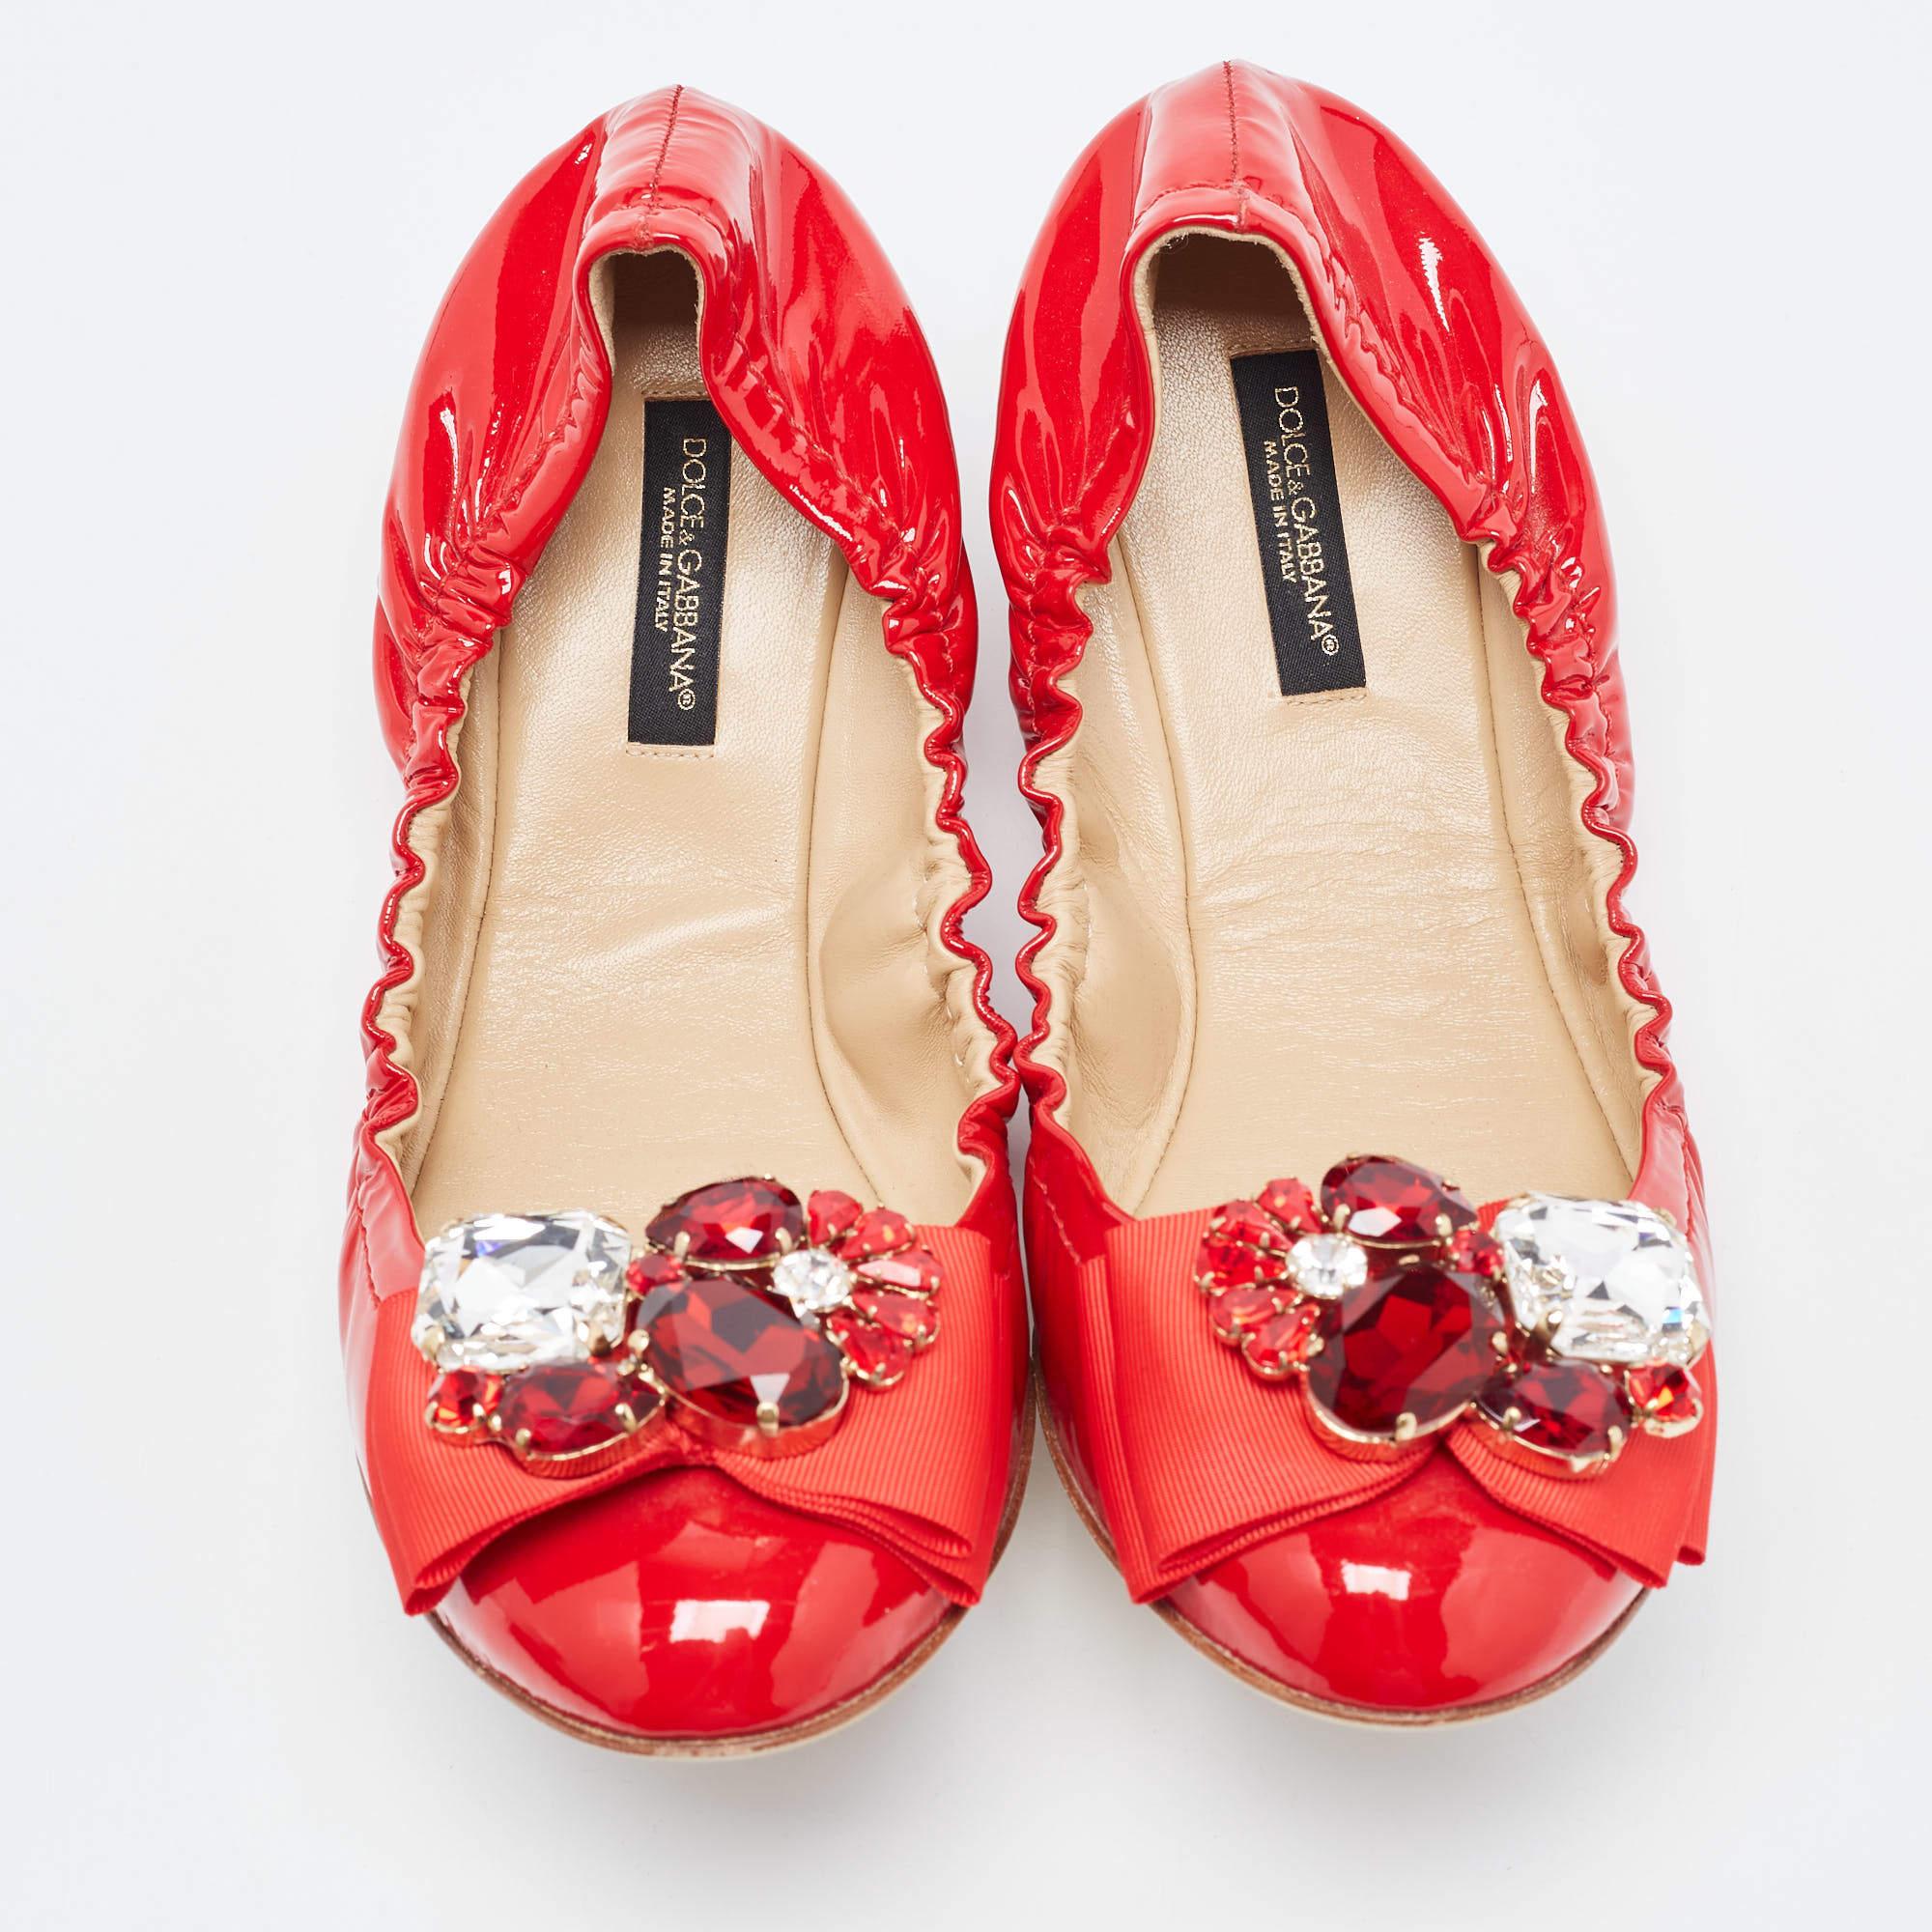 Dolce & Gabbana Red Patent Leather Crystal Embellished Bow Scrunch Ballet Flats  3